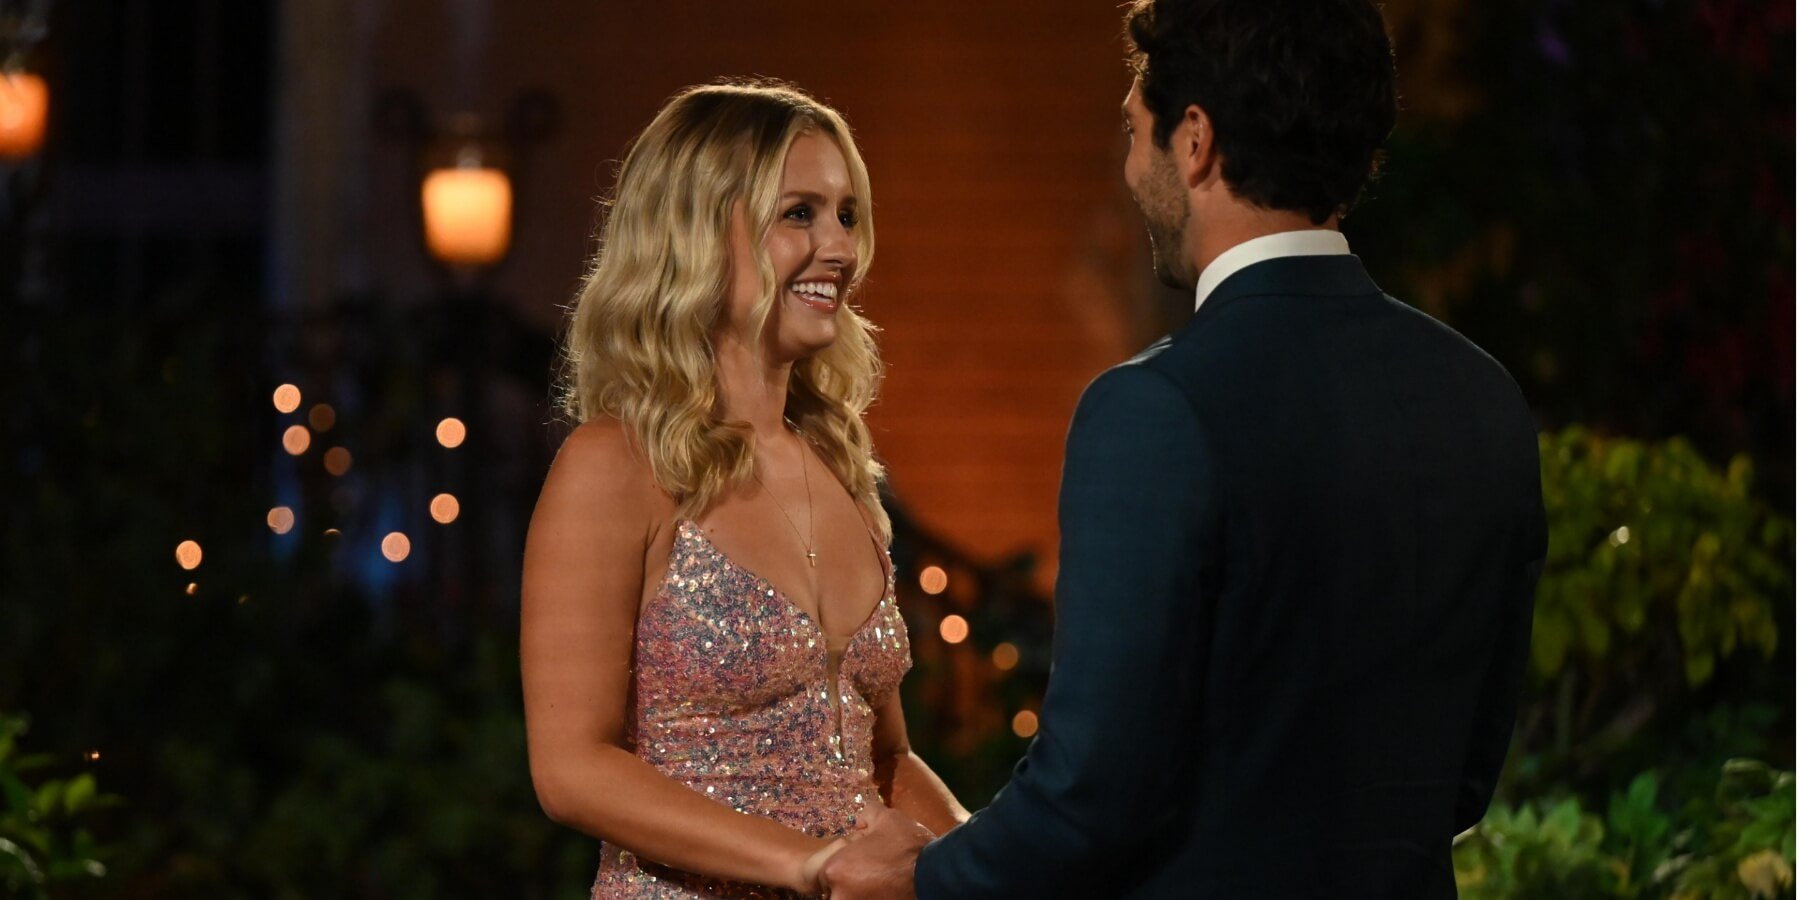 'The Bachelor's' Daisy Kent Opens up About Meniere's Disease Diagnosis